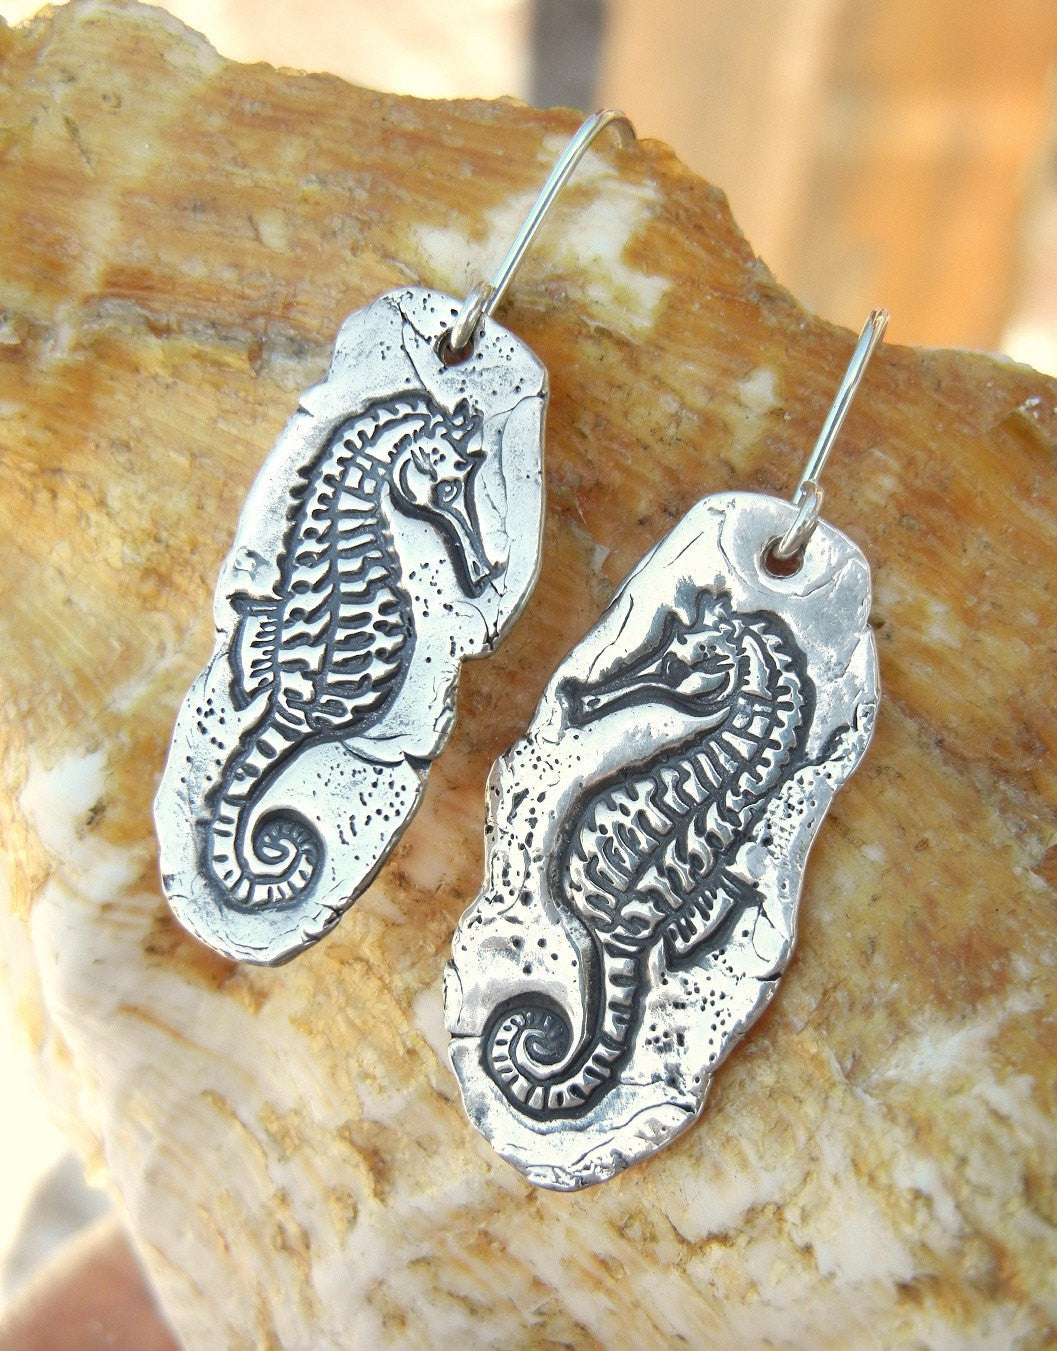 Seahorse Beachy Silver Earrings - HappyGoLicky Jewelry